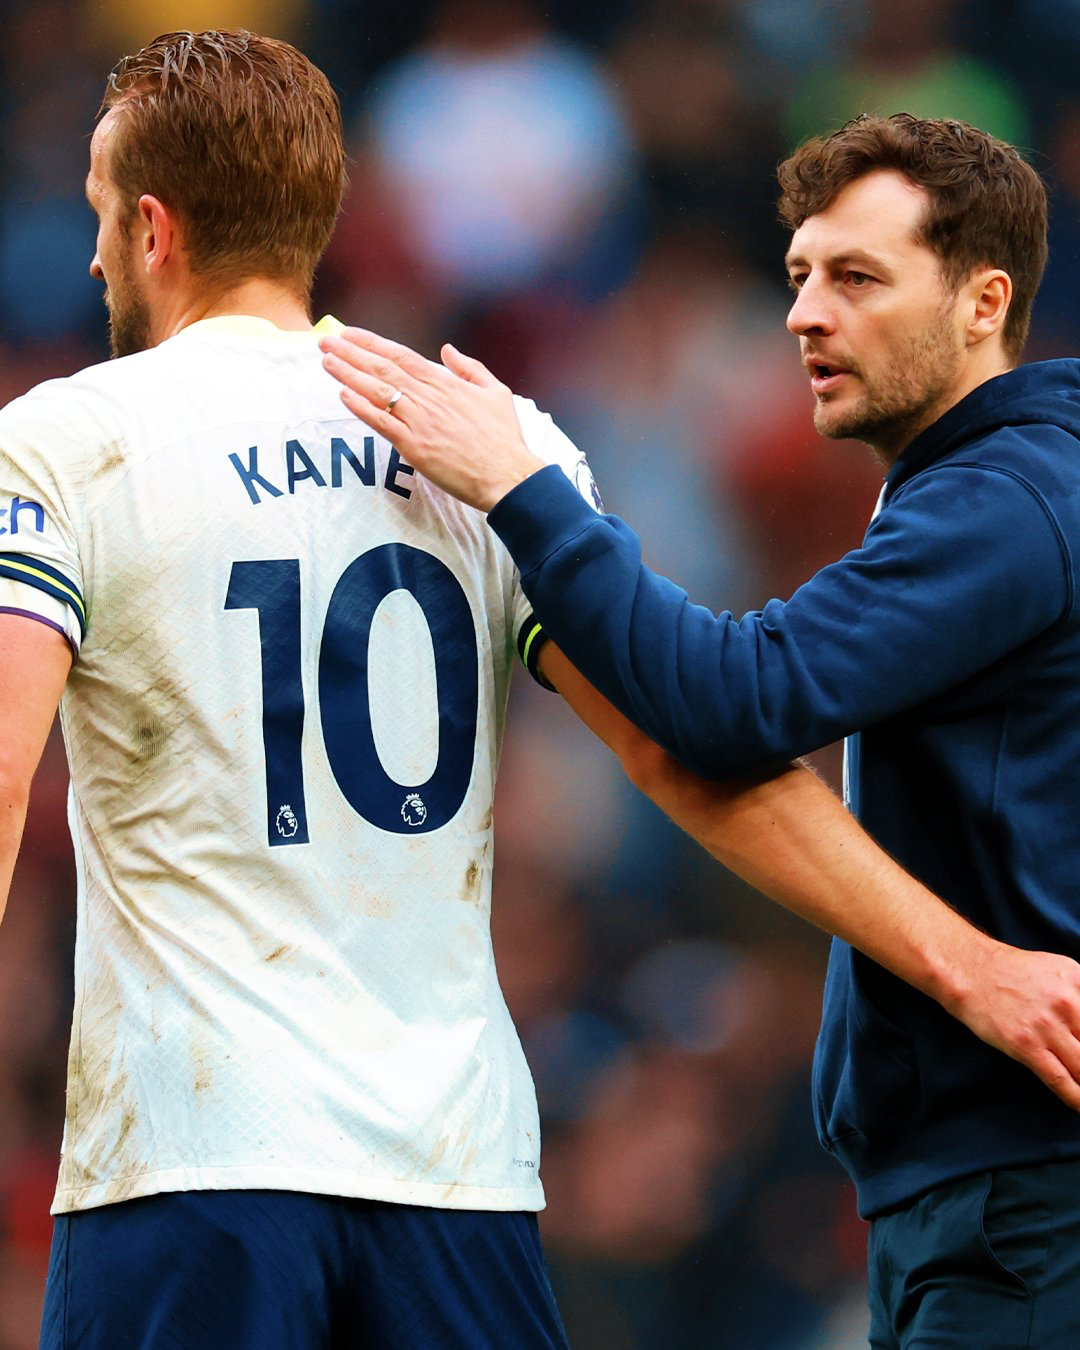 Ryan Mason claps Harry Kane on the back during a game.